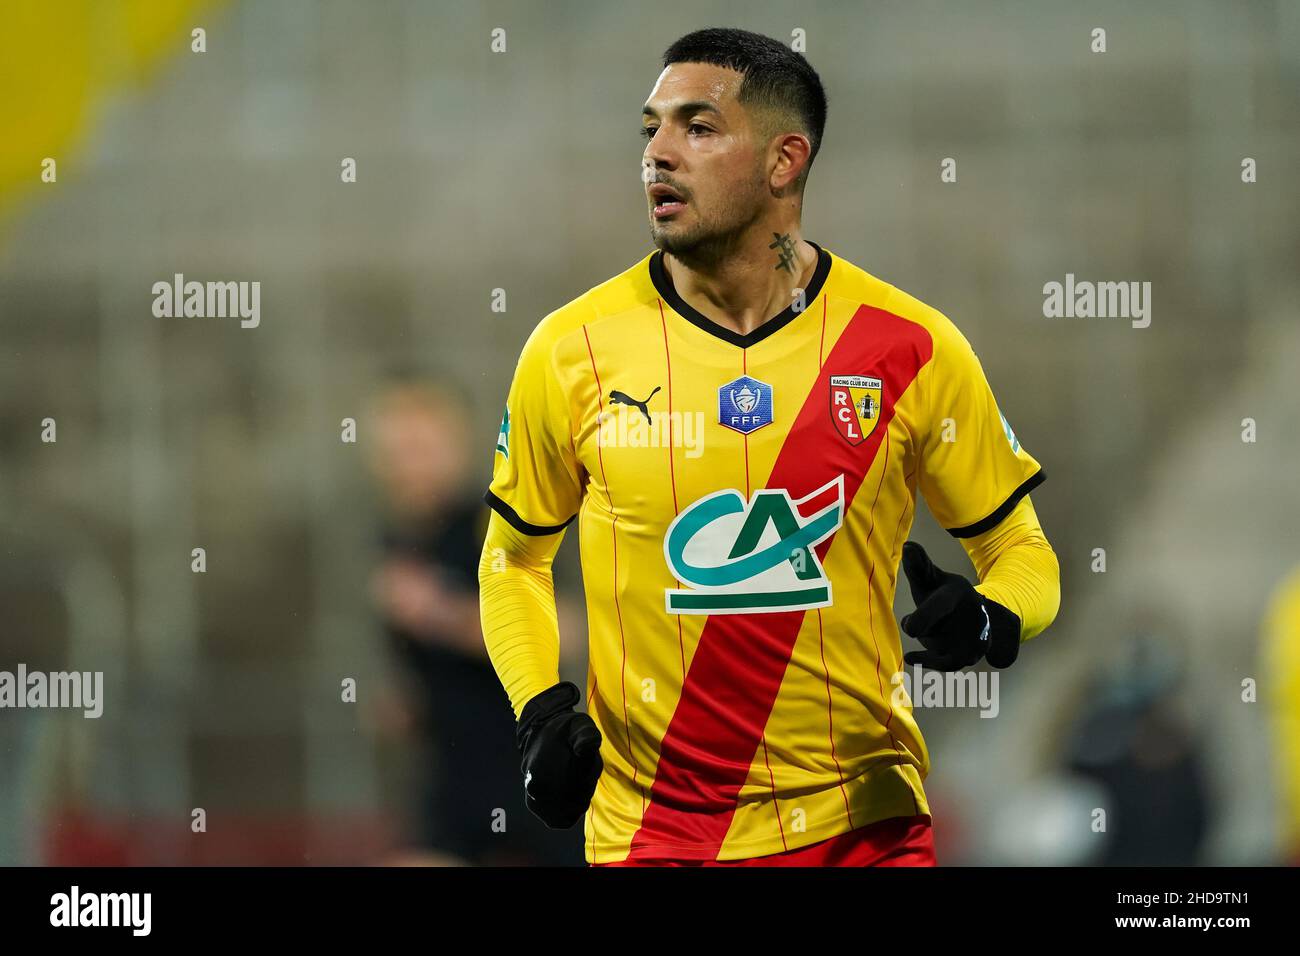 Gezond statistieken Geologie LENS, FRANCE - JANUARY 4: Facundo Medina of RC Lens during the French Cup  match between Racing Club de Lens and LOSC Lille at Stade Bollaert-Delelis  on January 4, 2022 in Lens,